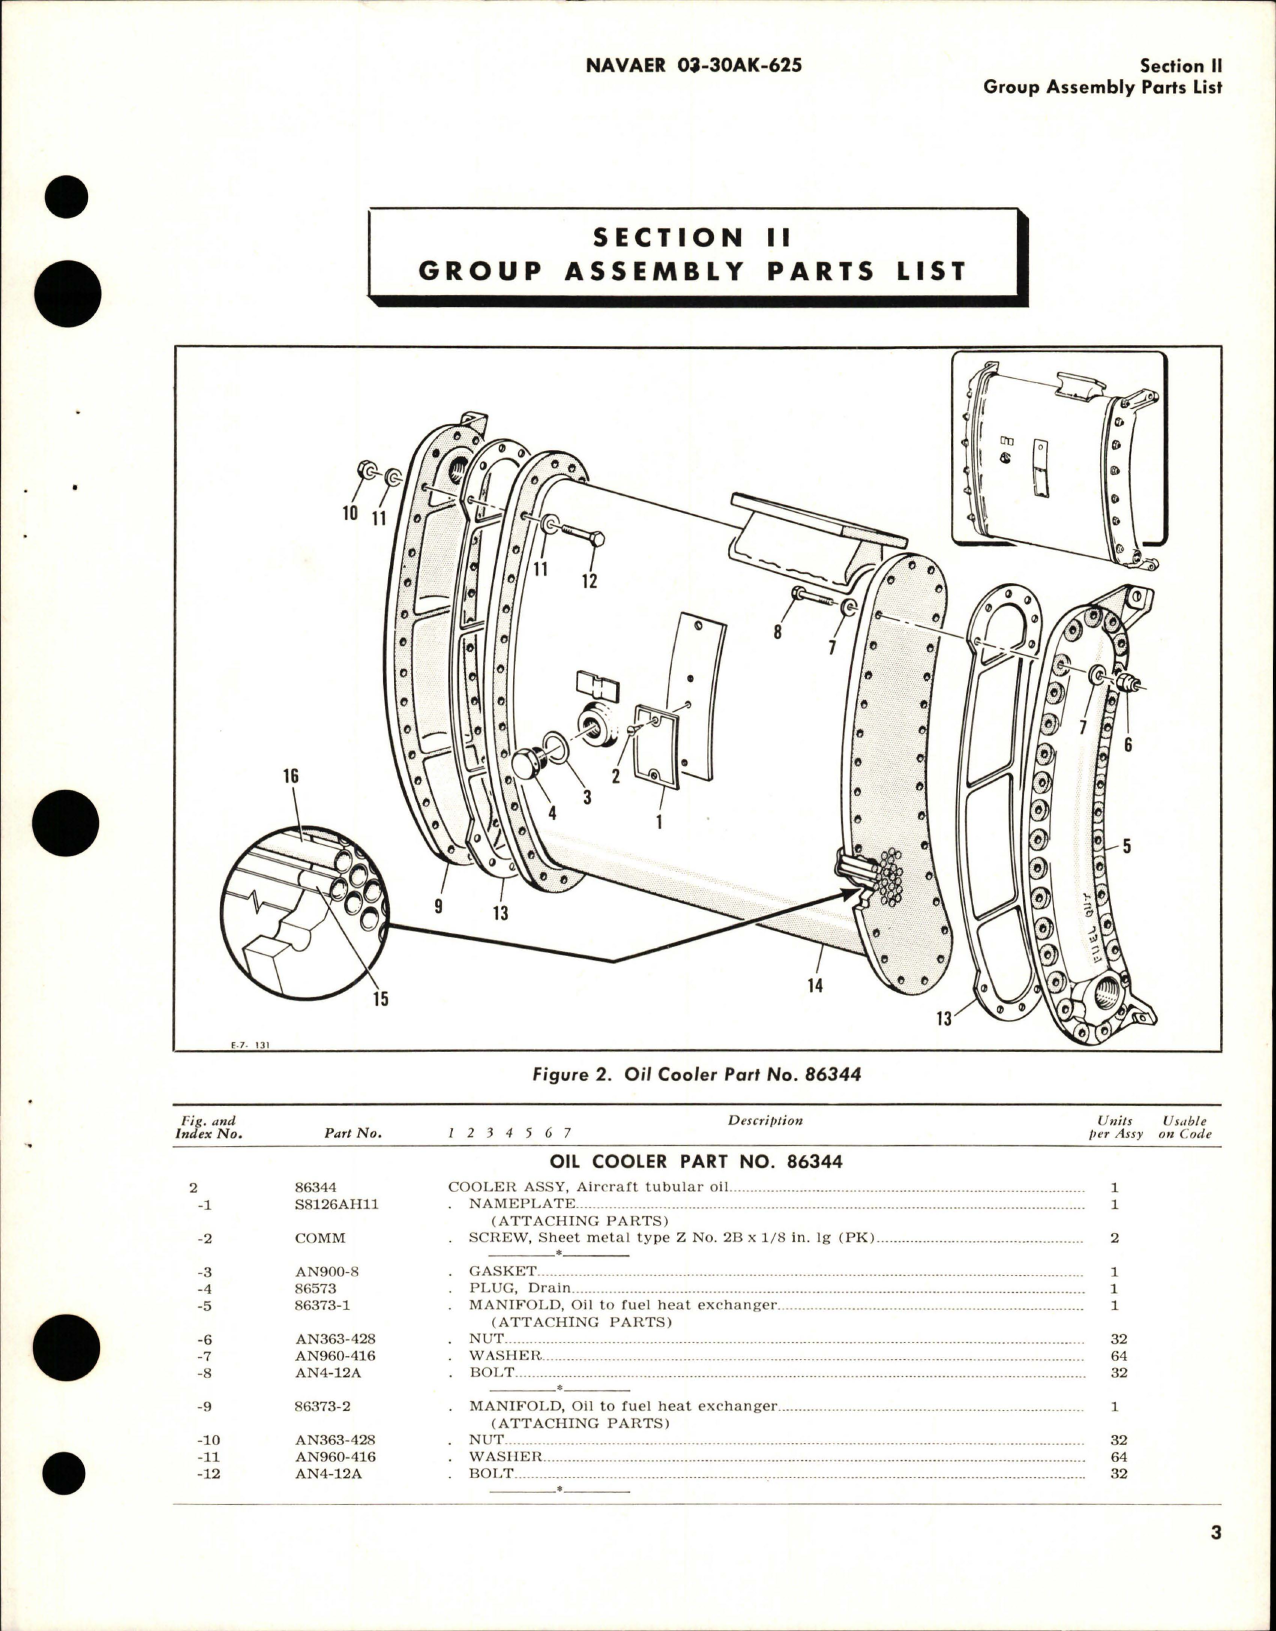 Sample page 5 from AirCorps Library document: Illustrated Parts Breakdown for Oil Coolers, Heat Exchanger and Fuel Heater - Parts 86787 and 87889